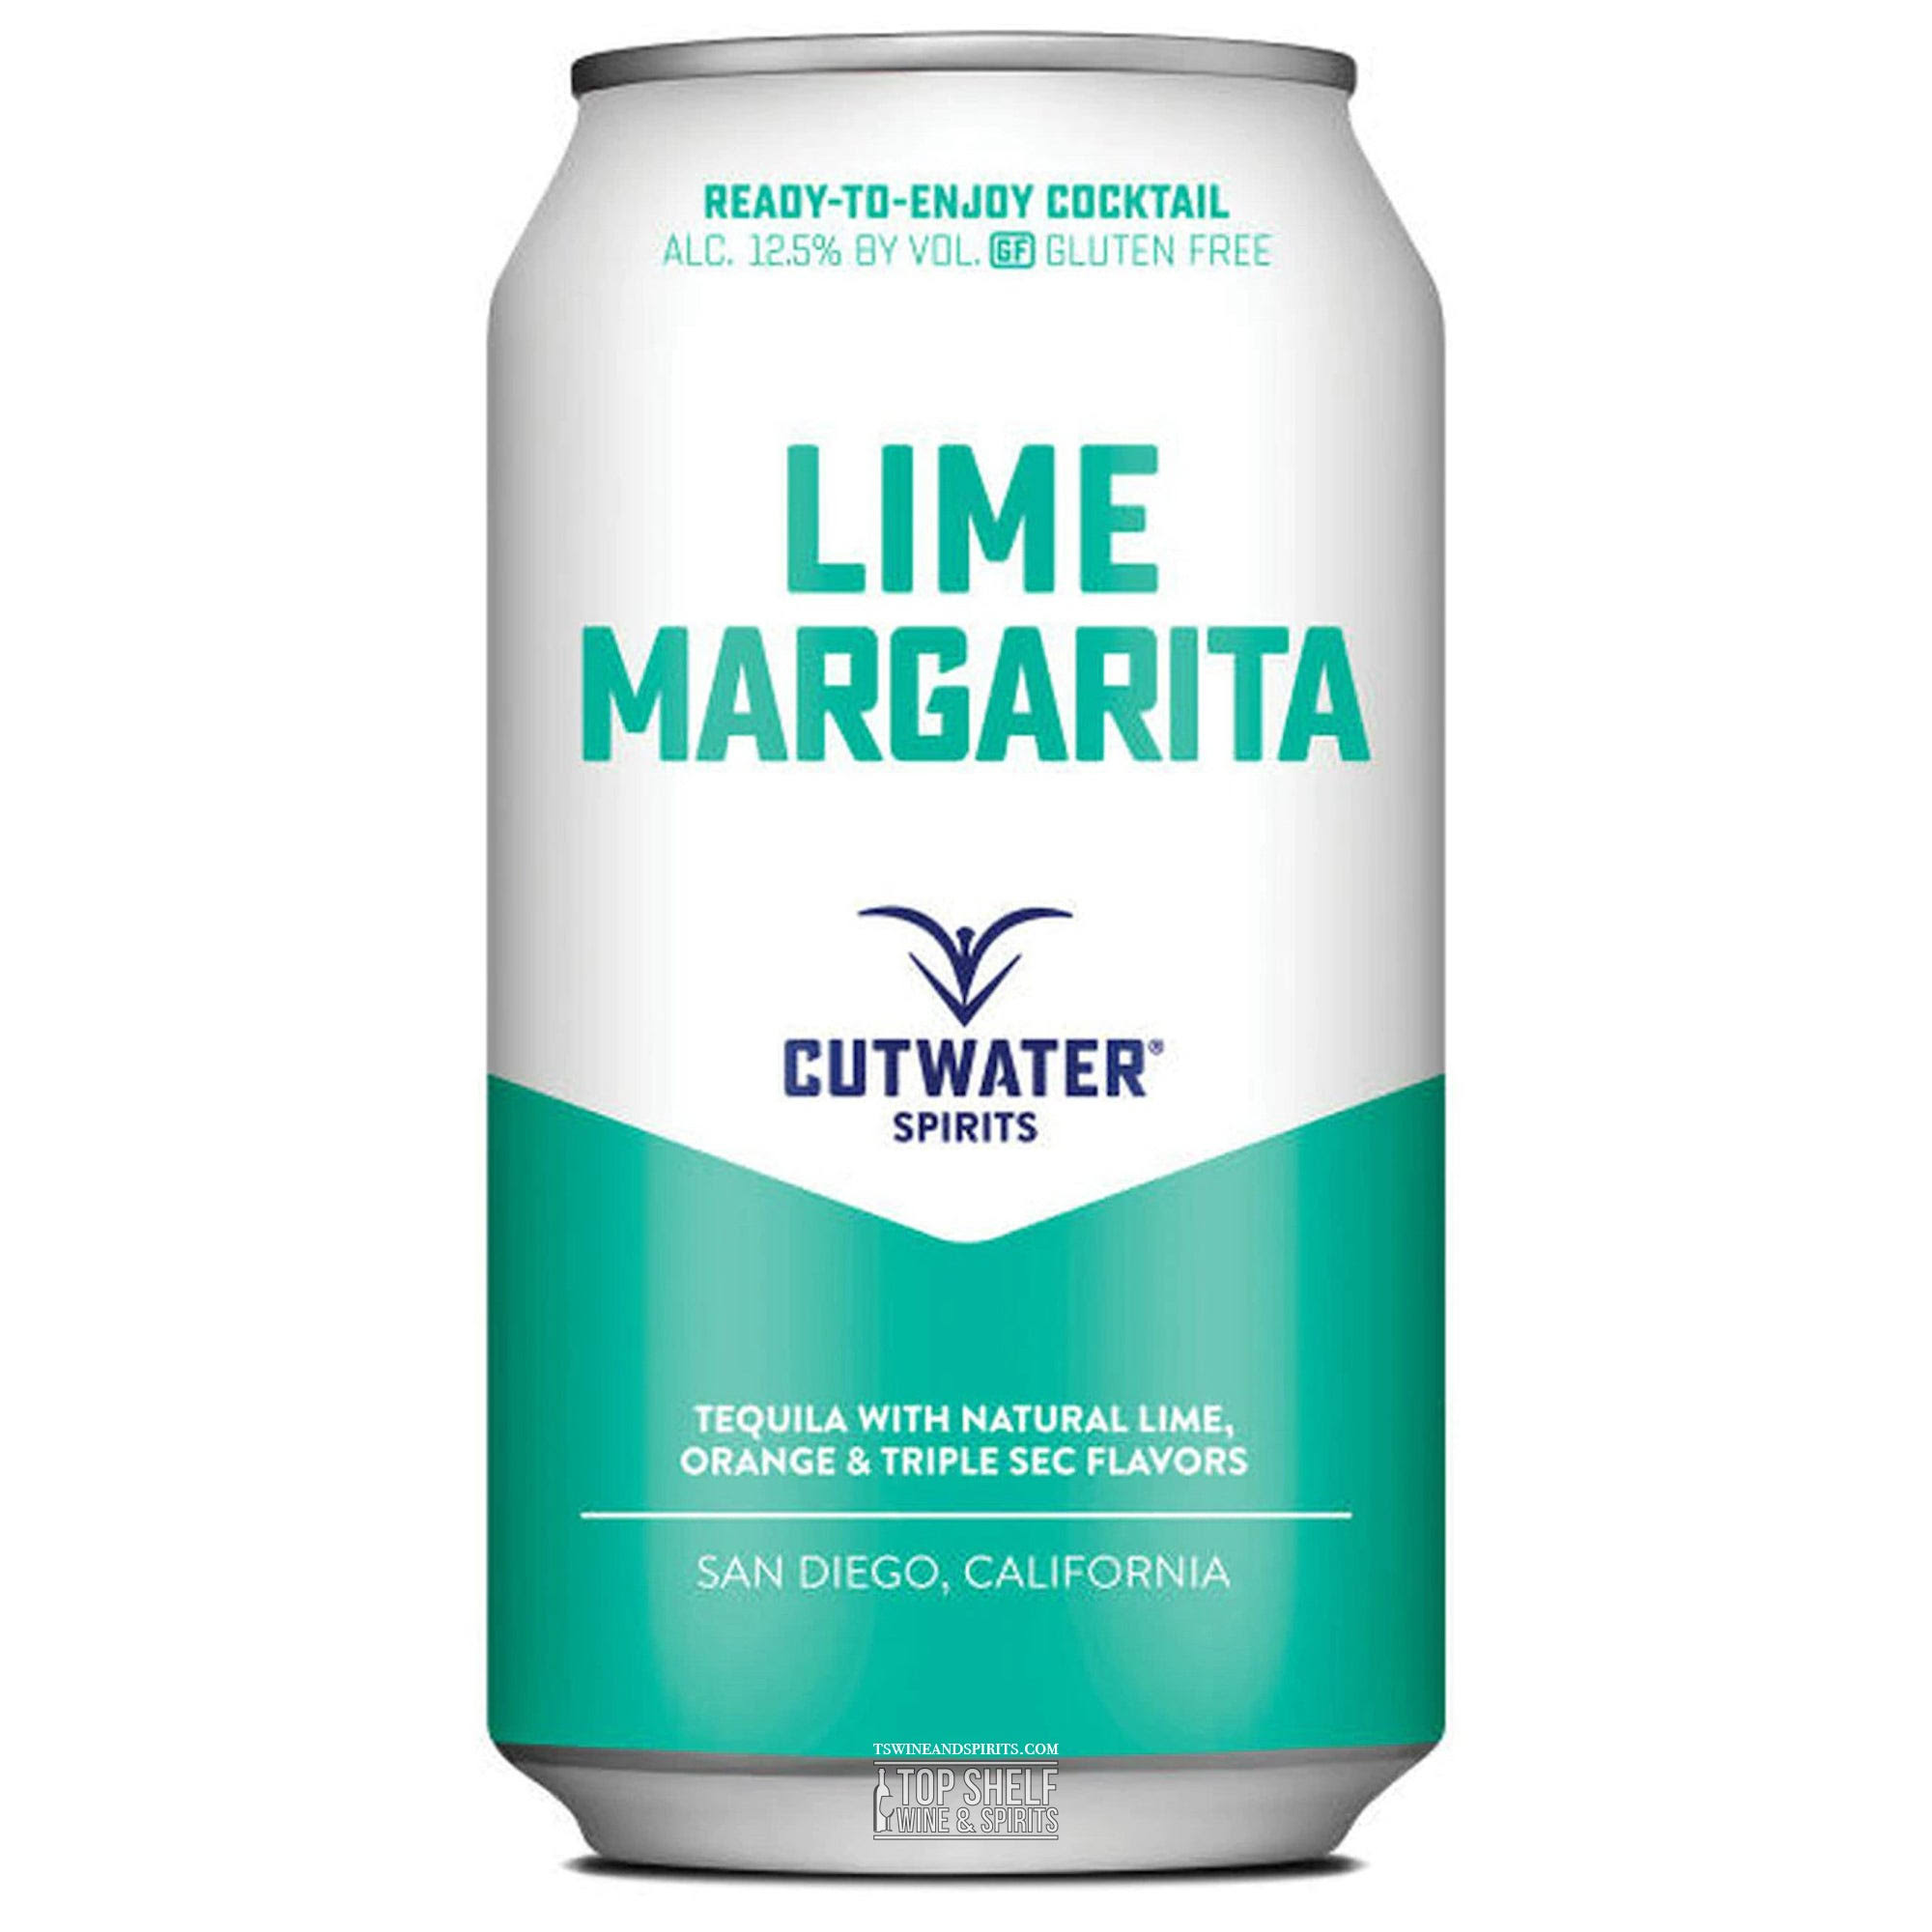 CutWater Spirits Tequila Margarita 4 x 355ml Pre-Bottled Cocktails | ABV 12.50% 142CL